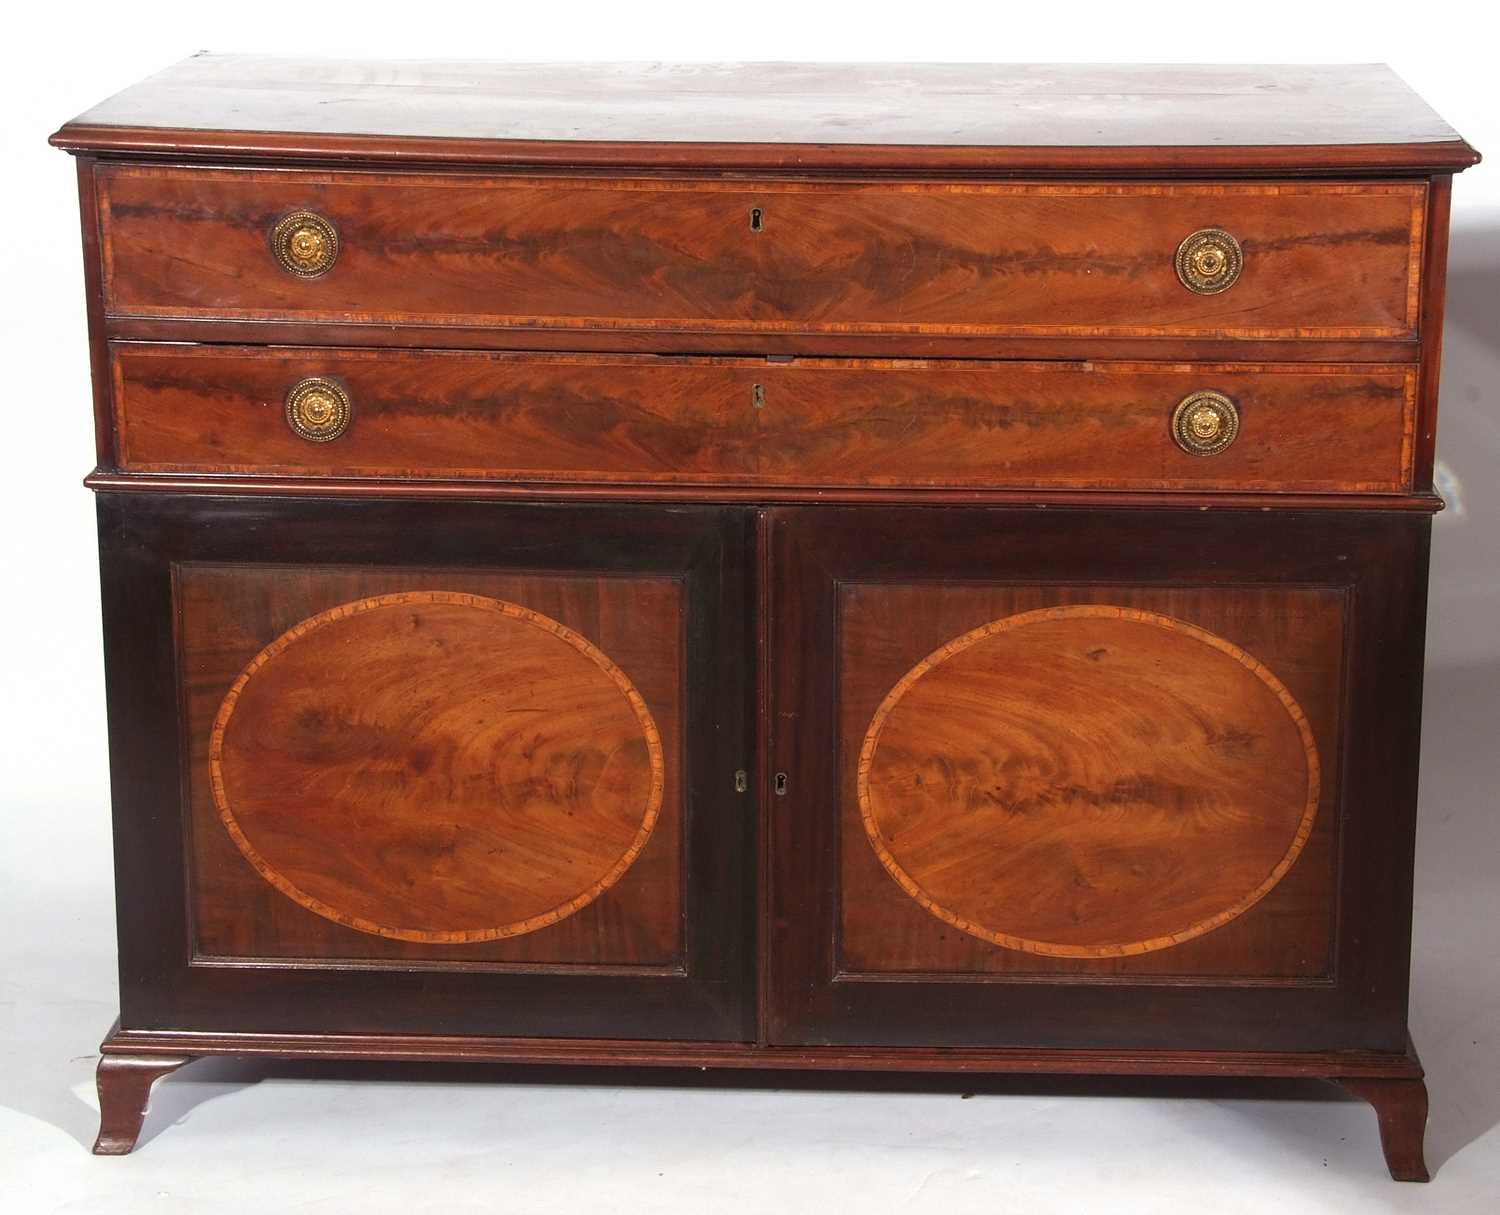 Georgian mahogany gentleman's cabinet with unusual top drawer formed of two sections opening to an - Image 2 of 3